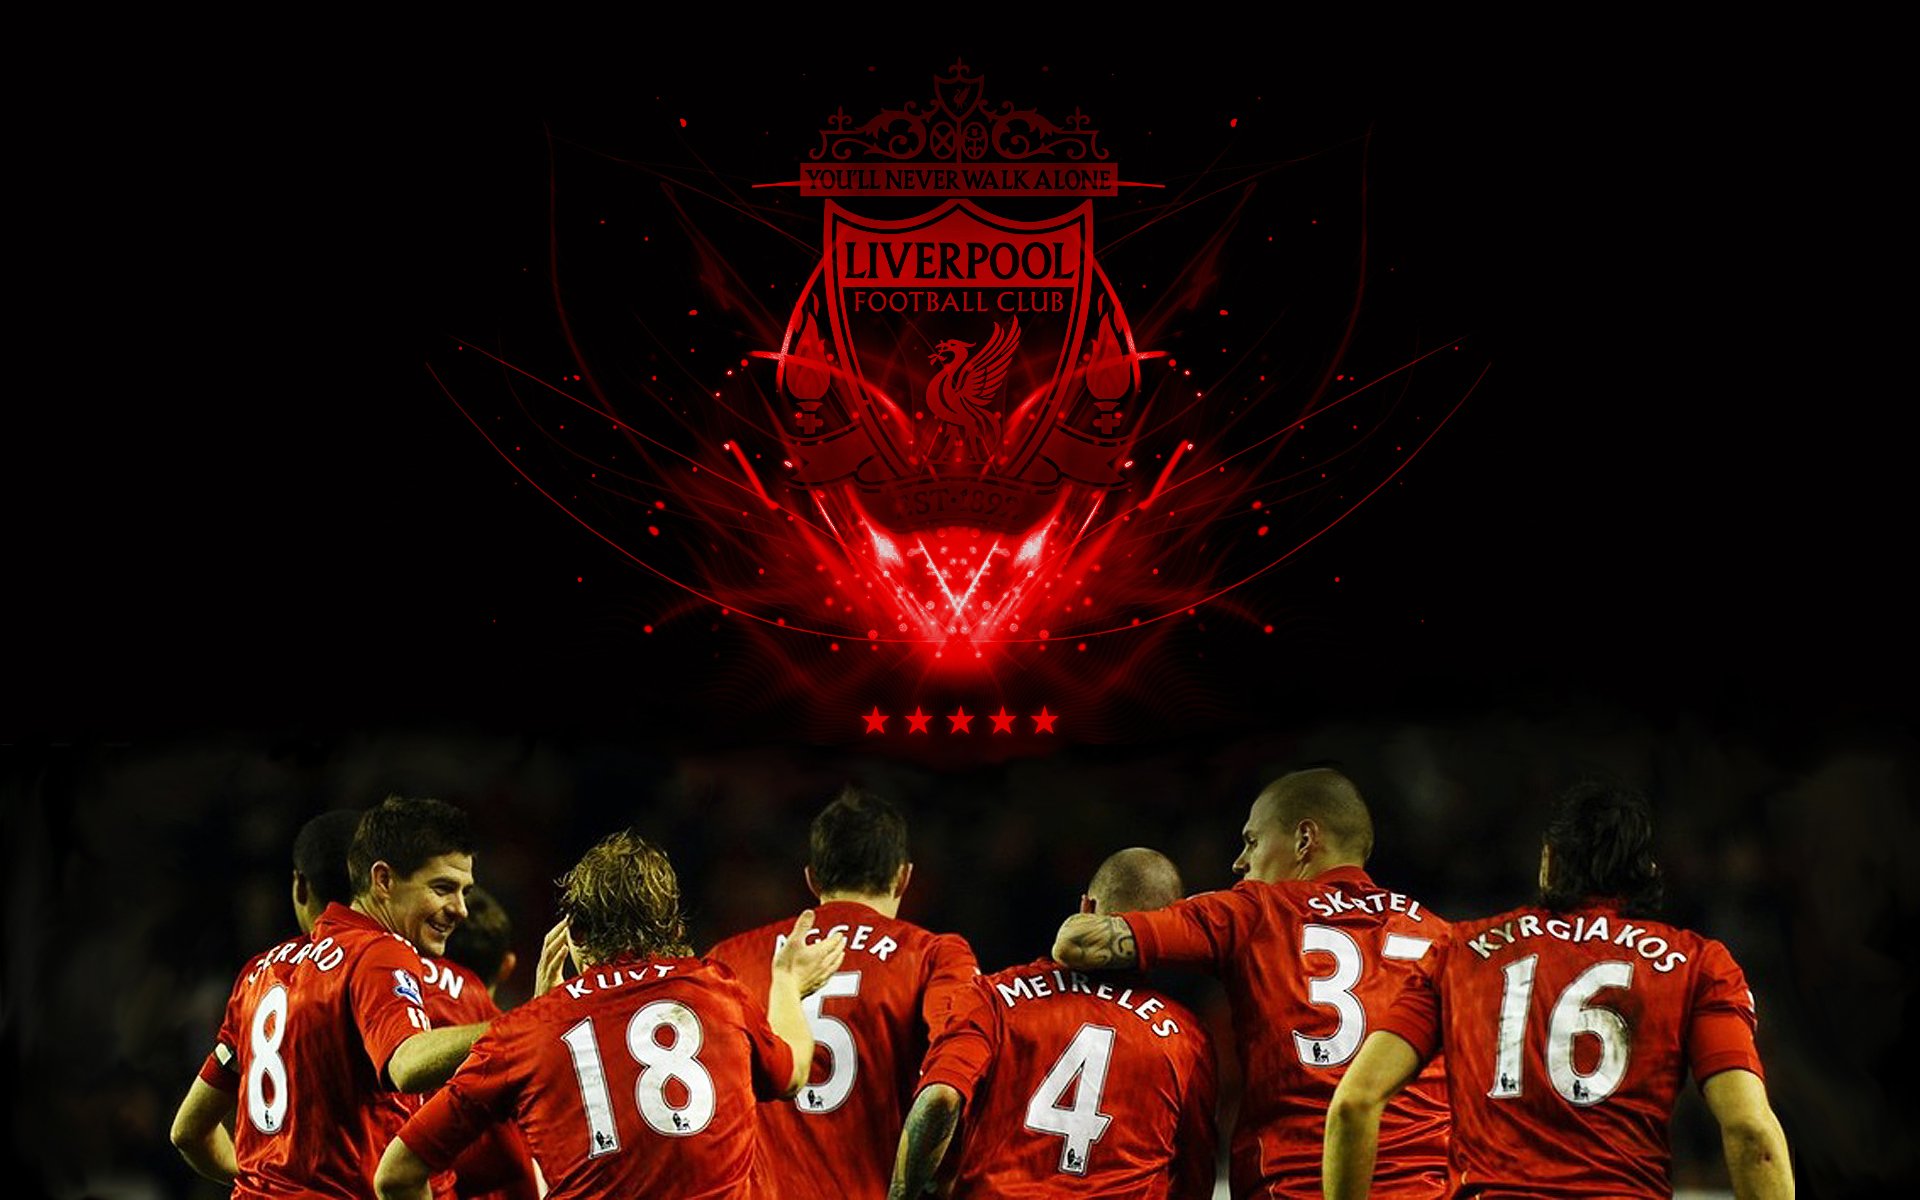 Liverpool Fc Wallpaper : Wallpaper Liverpool FC, The Reds, Football club, Logo, 4K ... / Find and download liverpool fc wallpapers in hd at european football insider for your desktop, android, iphone phones or tablet.